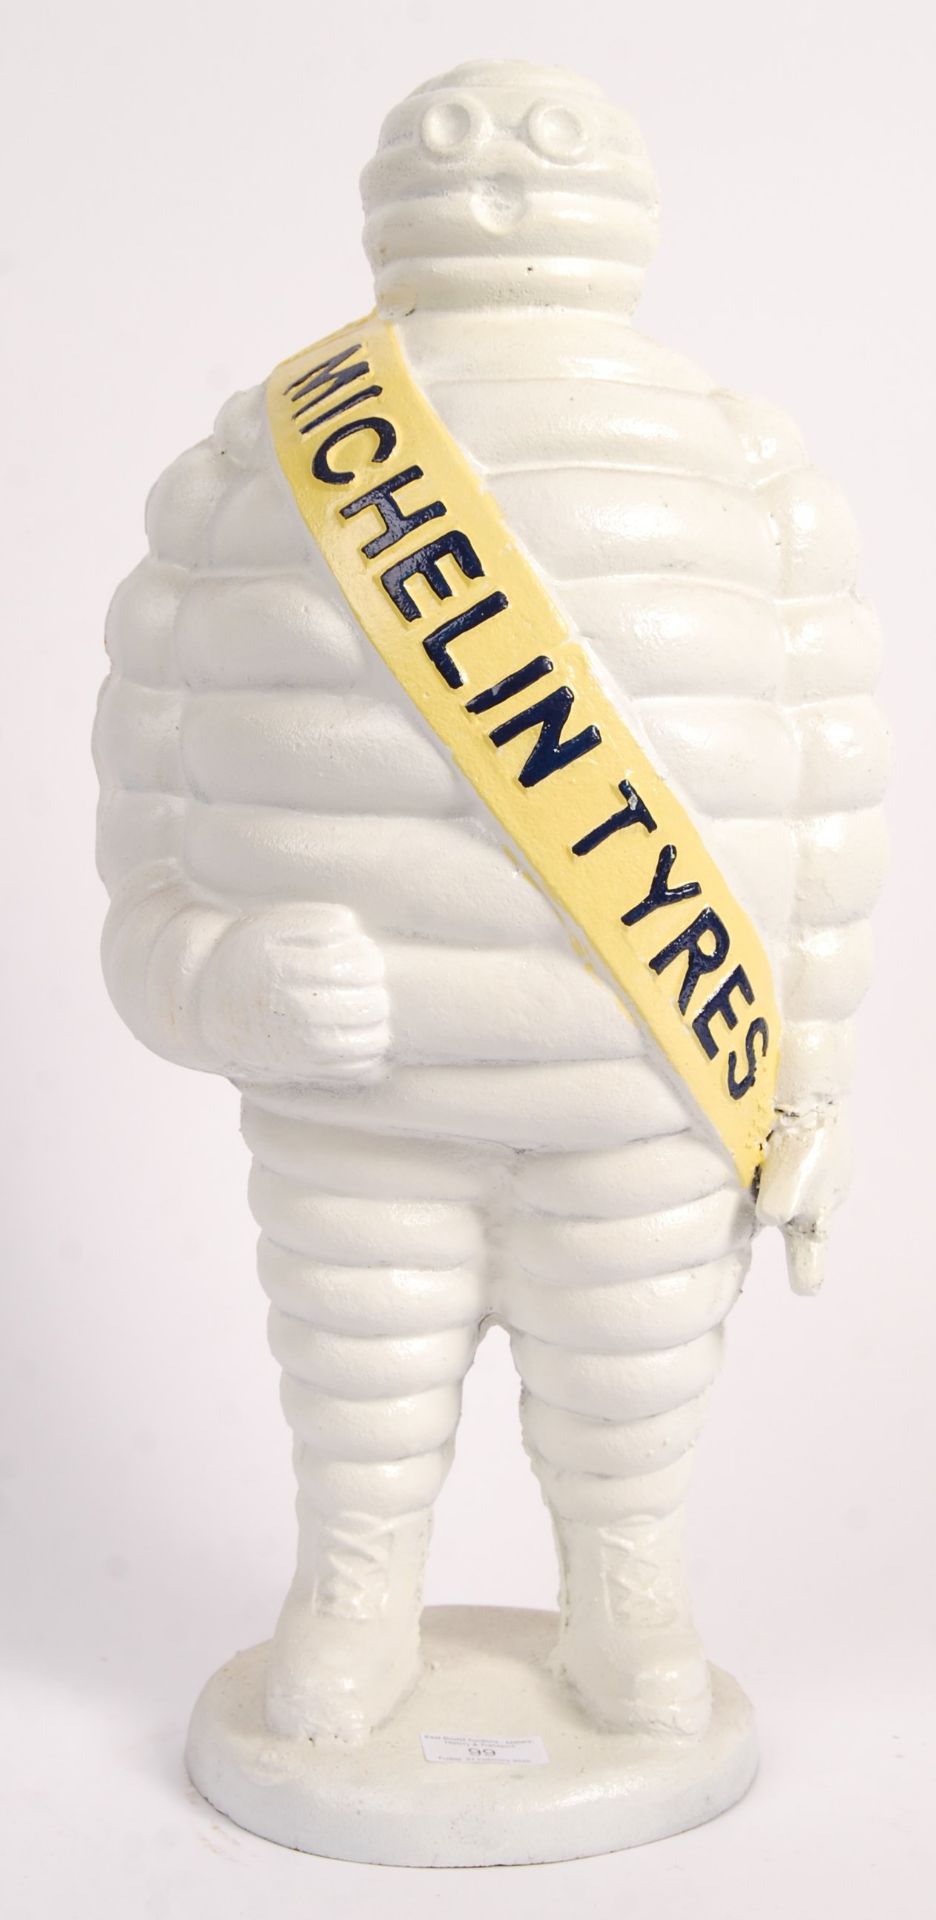 LARGE MICHELIN TYRES ADVERTISING FIGURE MASCOT